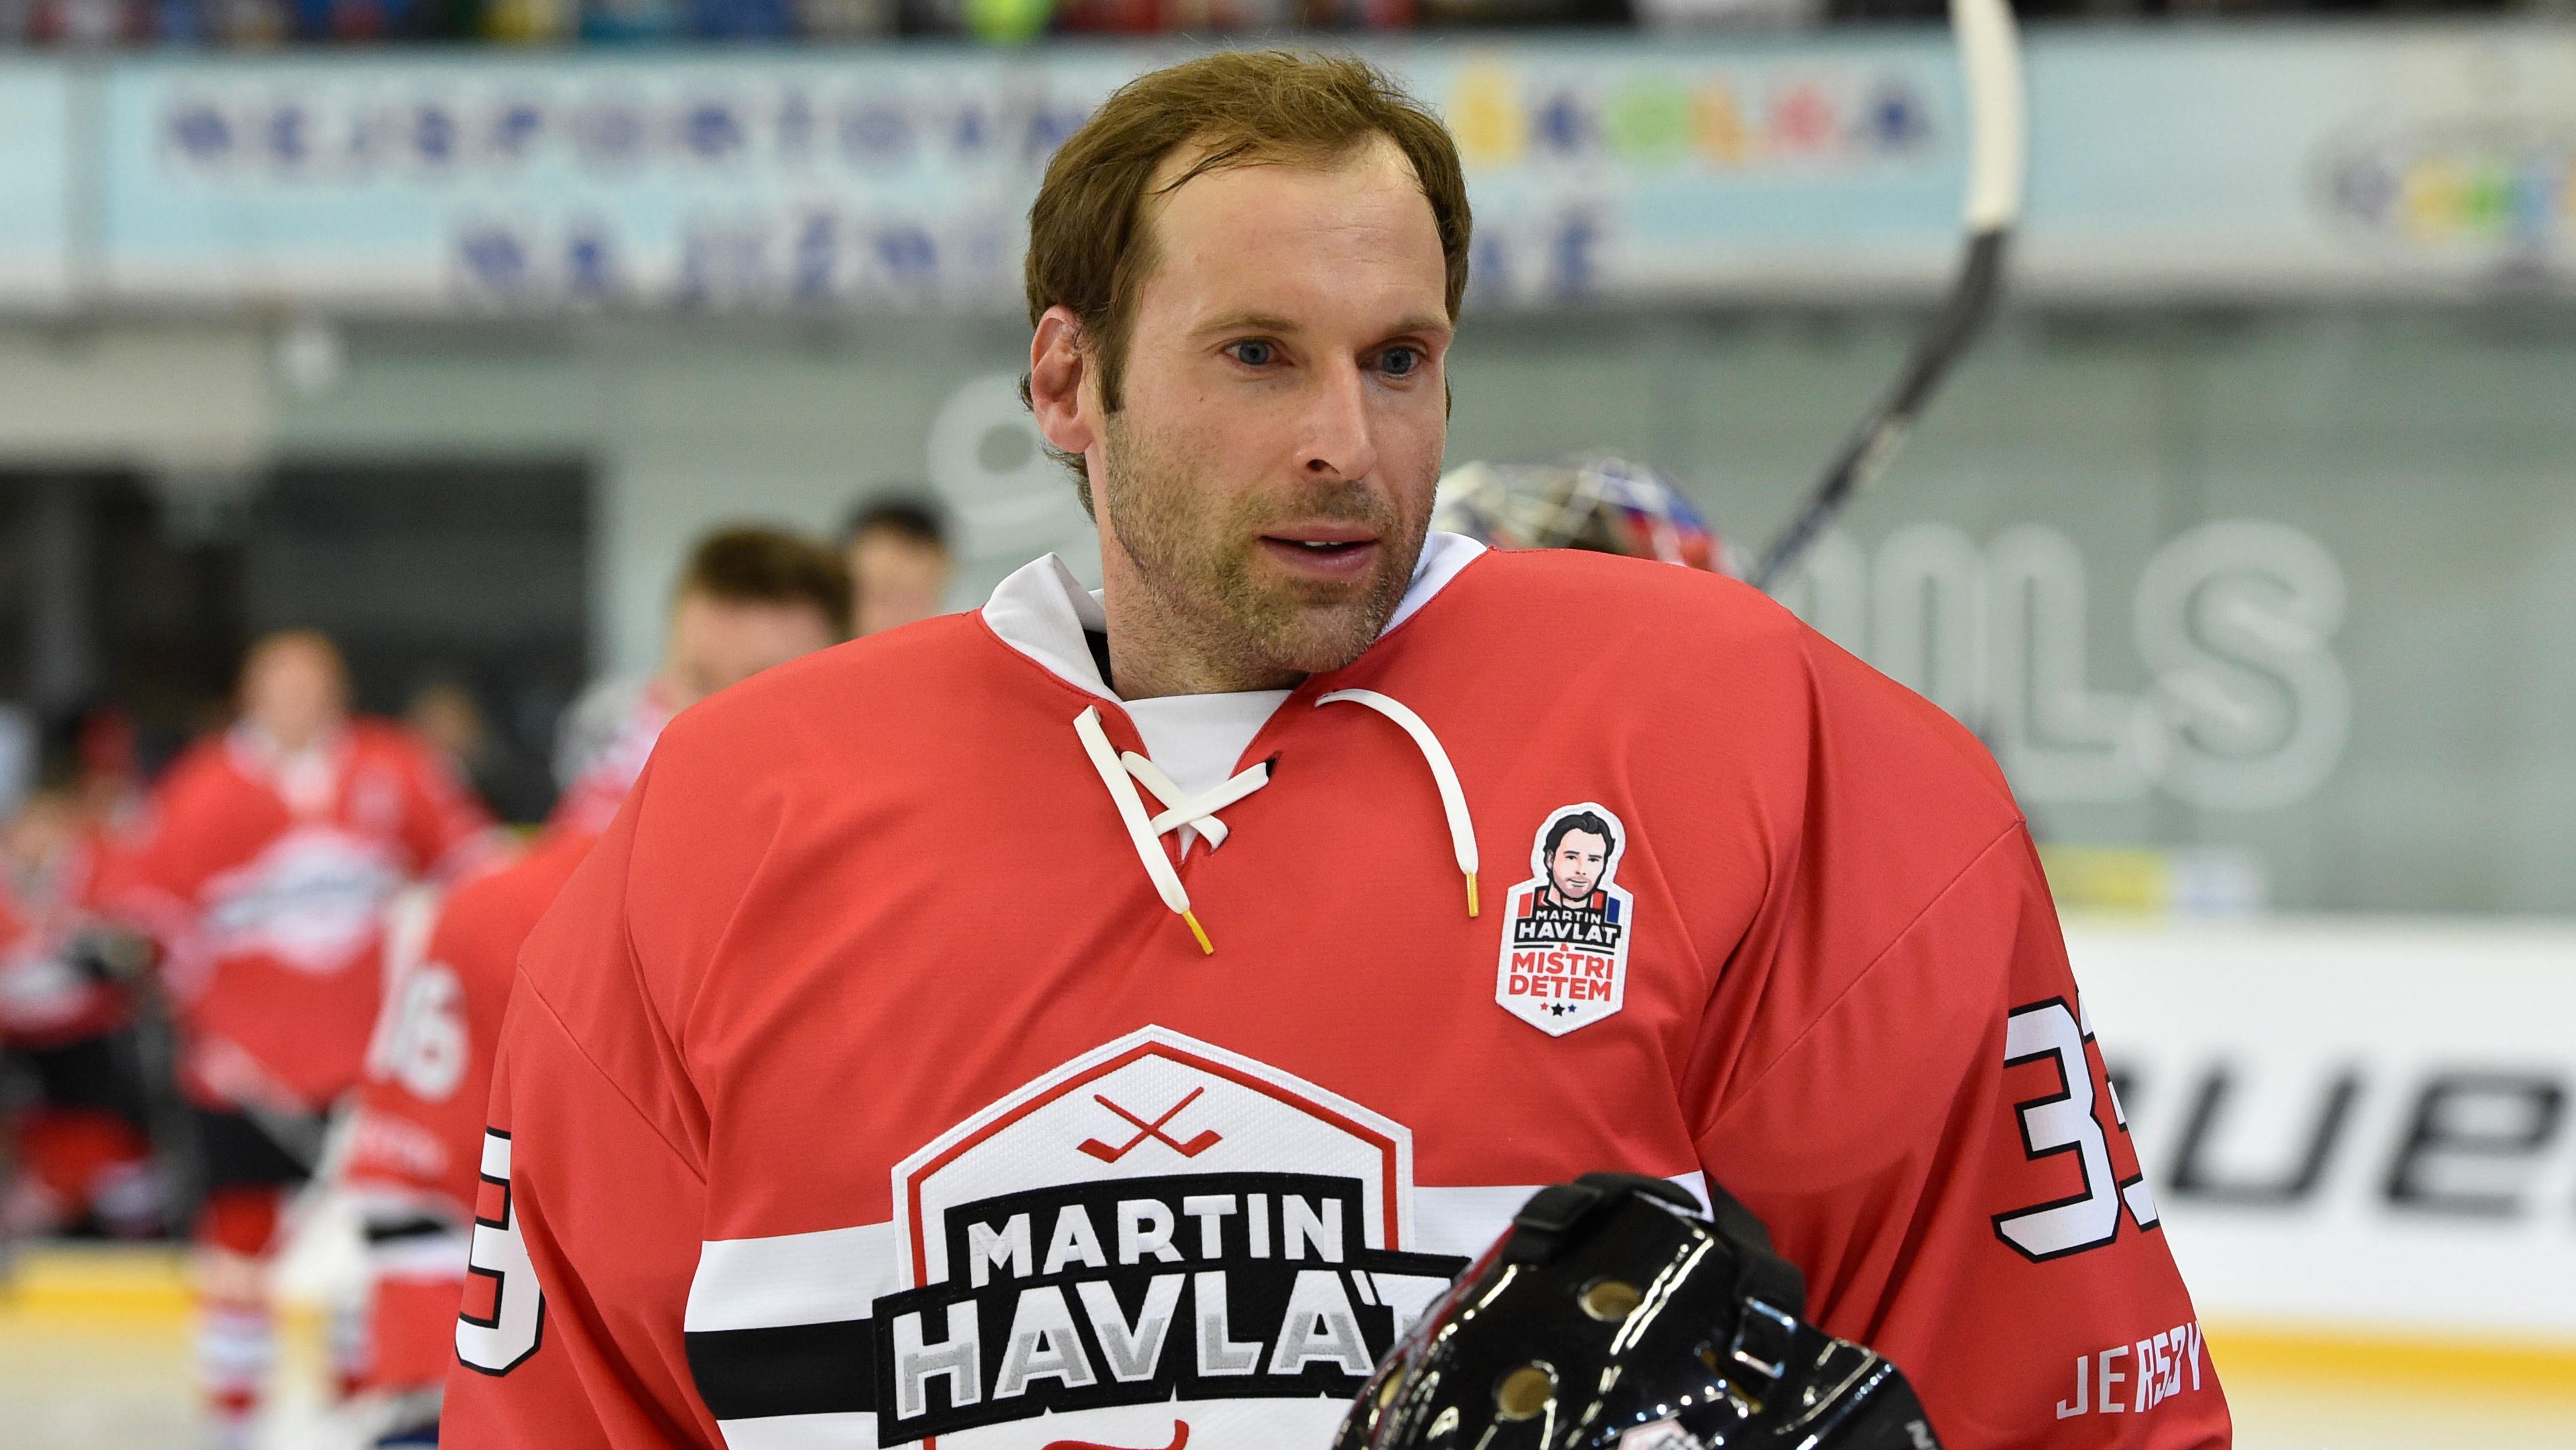 No joy for Petr Cech as Invicta beat Chelmsford in hockey cup